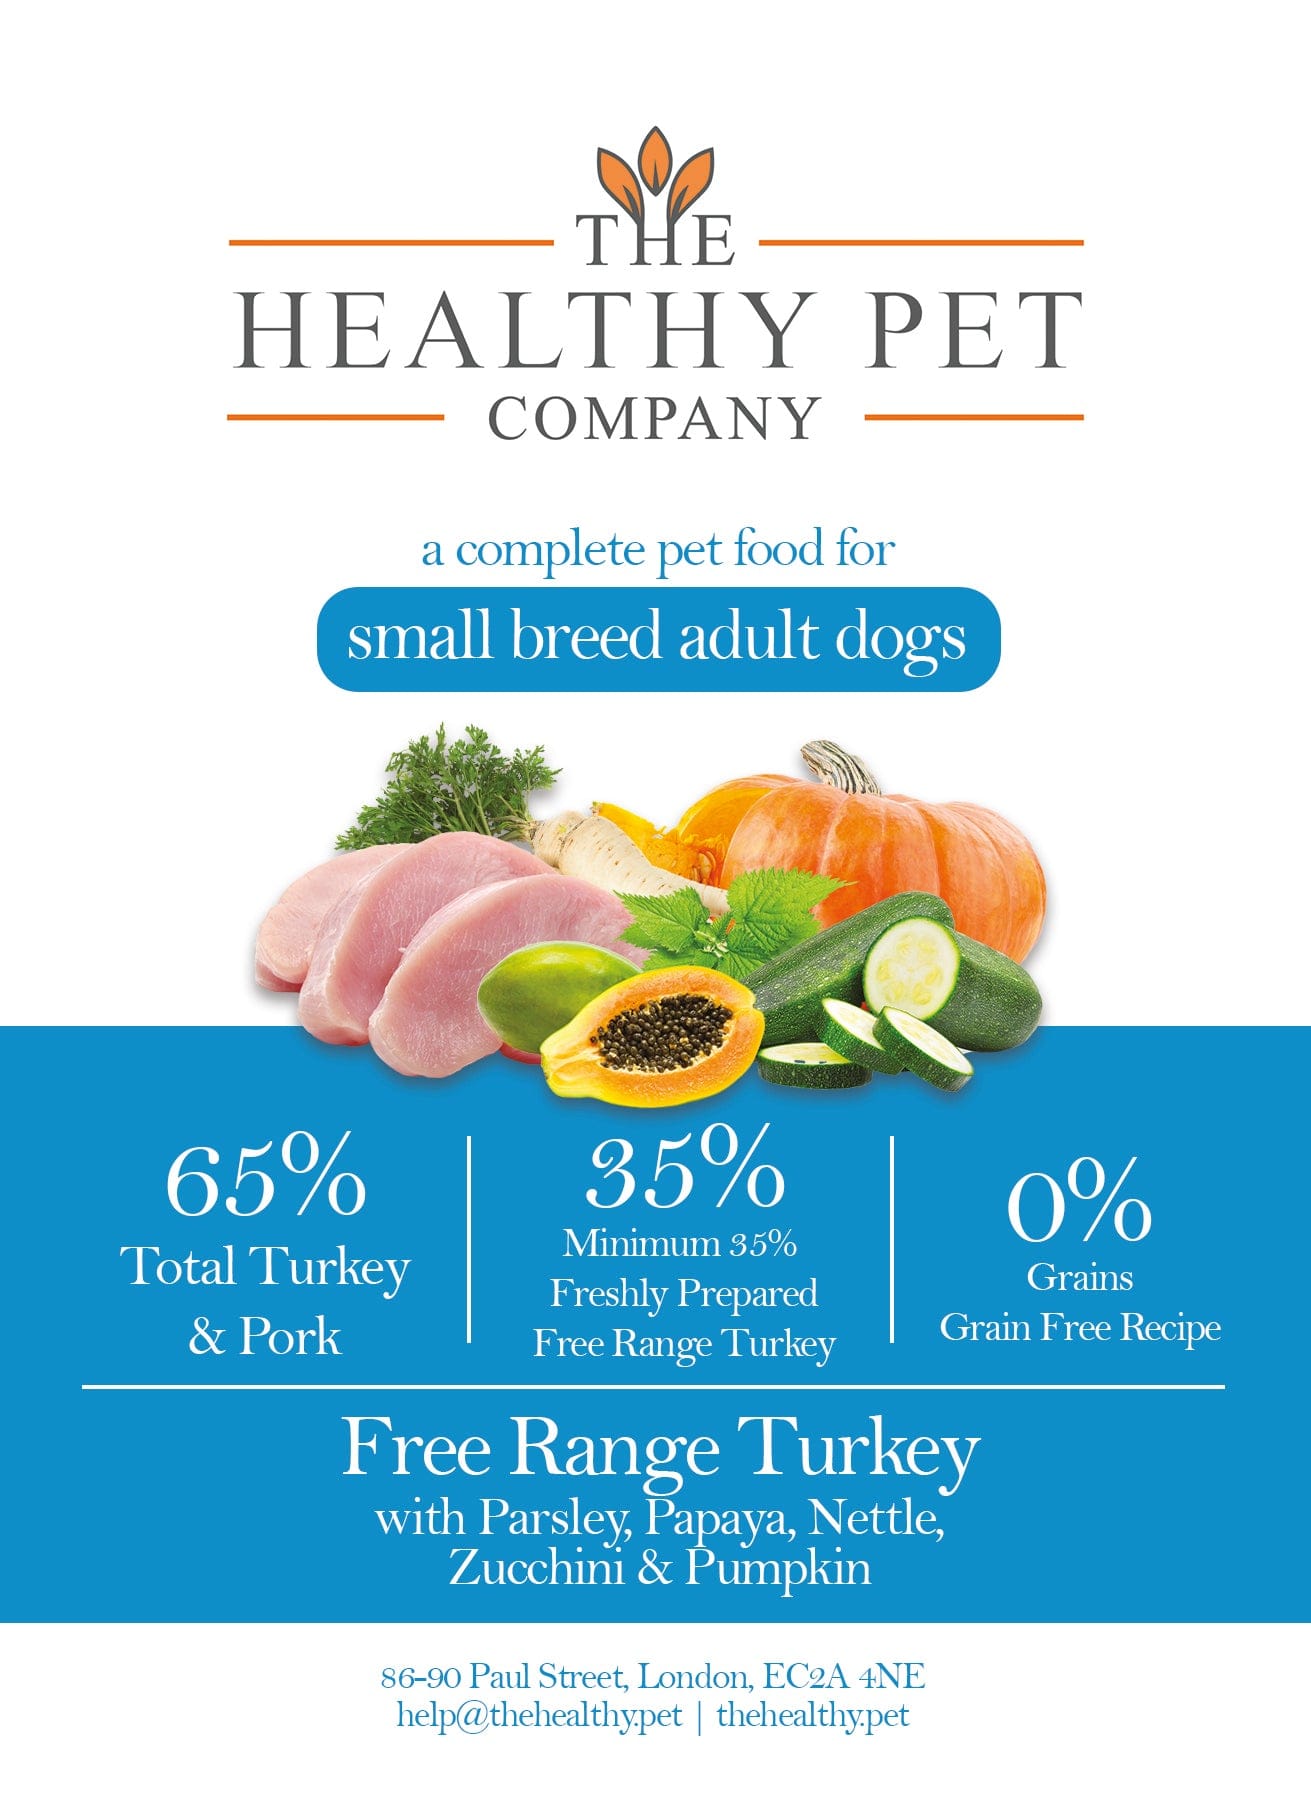 The Healthy Pet Company Complete Meal - Turkey & Veg for Small Breed Adult Dogs - The Healthy Pet Company